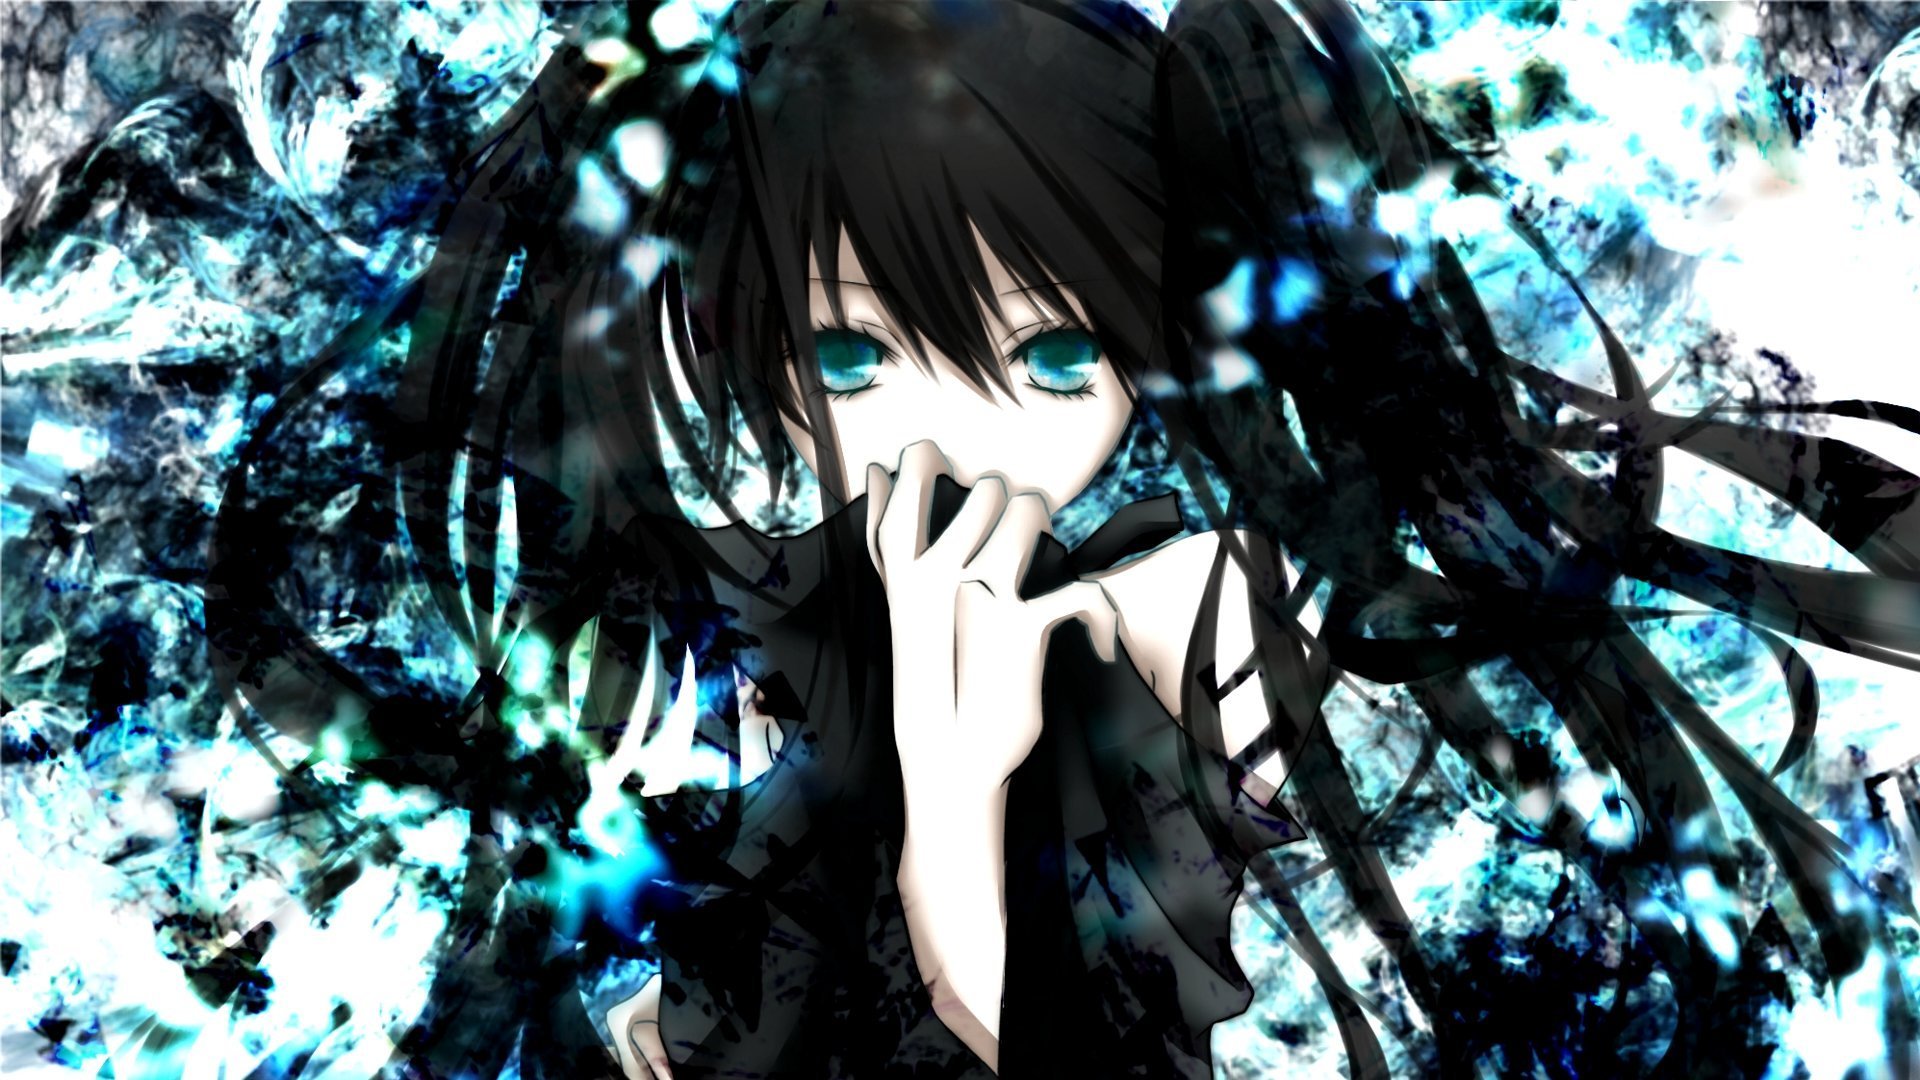 Girl Death Note Anime Wallpaper For Android With